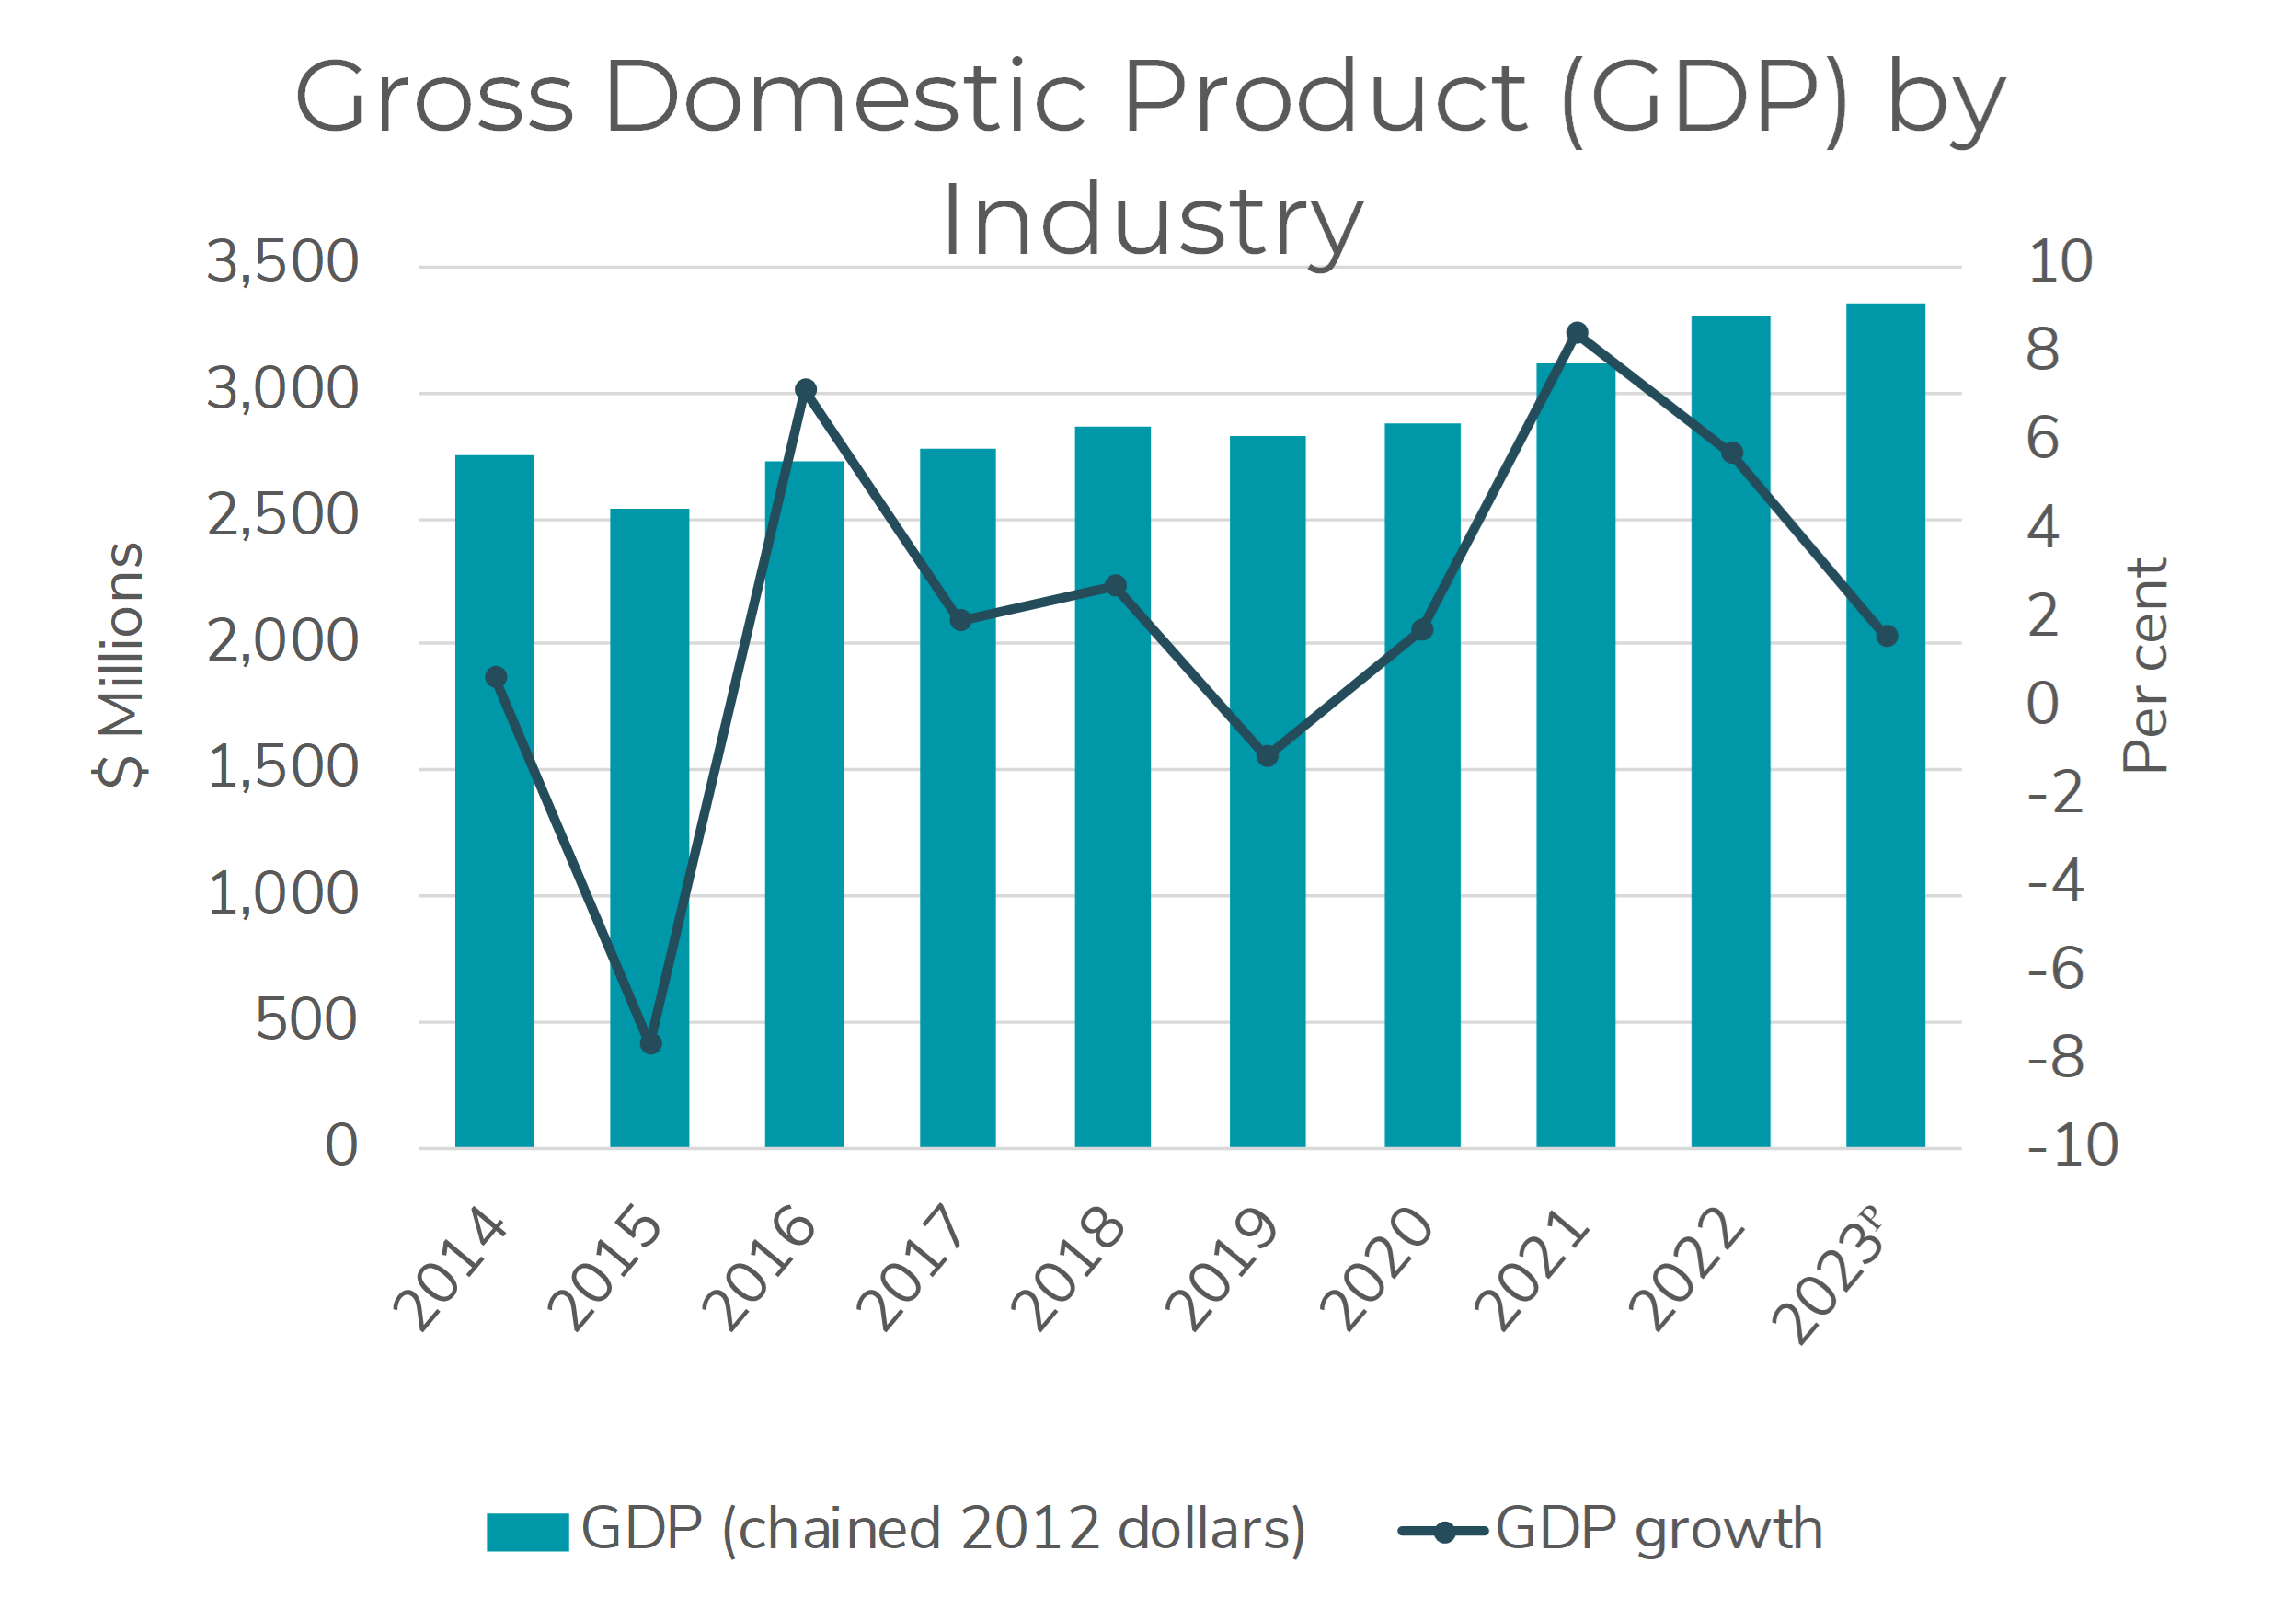 Chart showing key indicator of gross domestic product (GDP) by industry growth